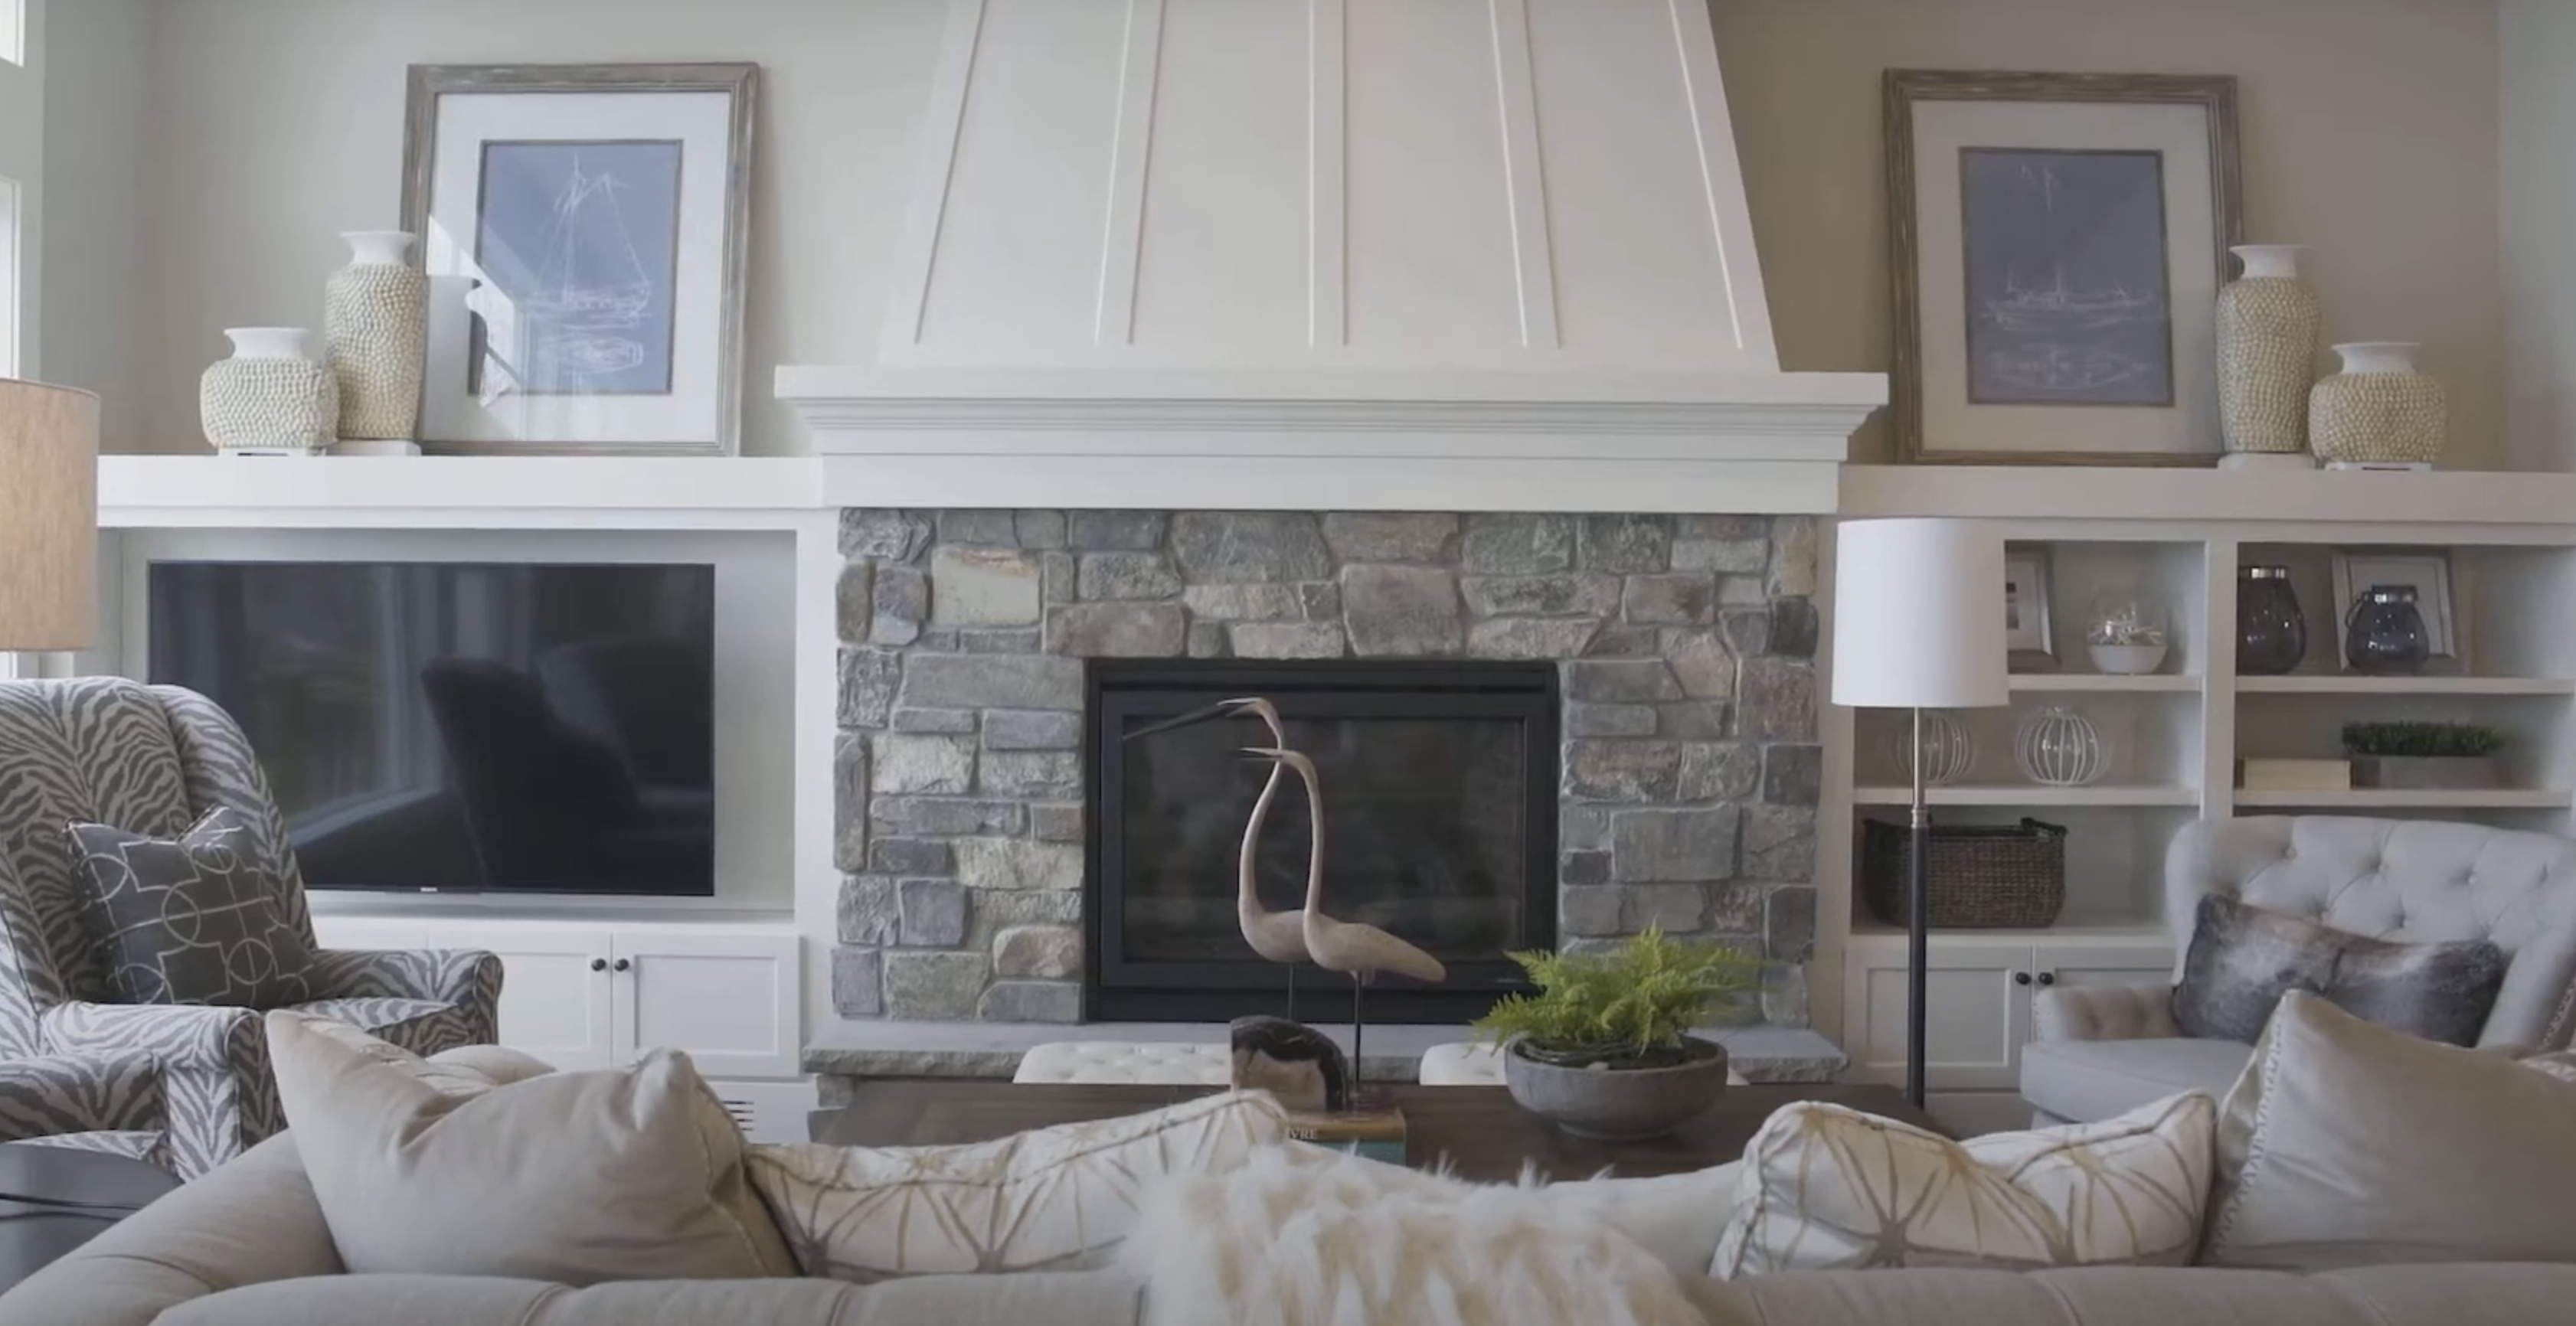 A living room with a stone fireplace and white furniture.